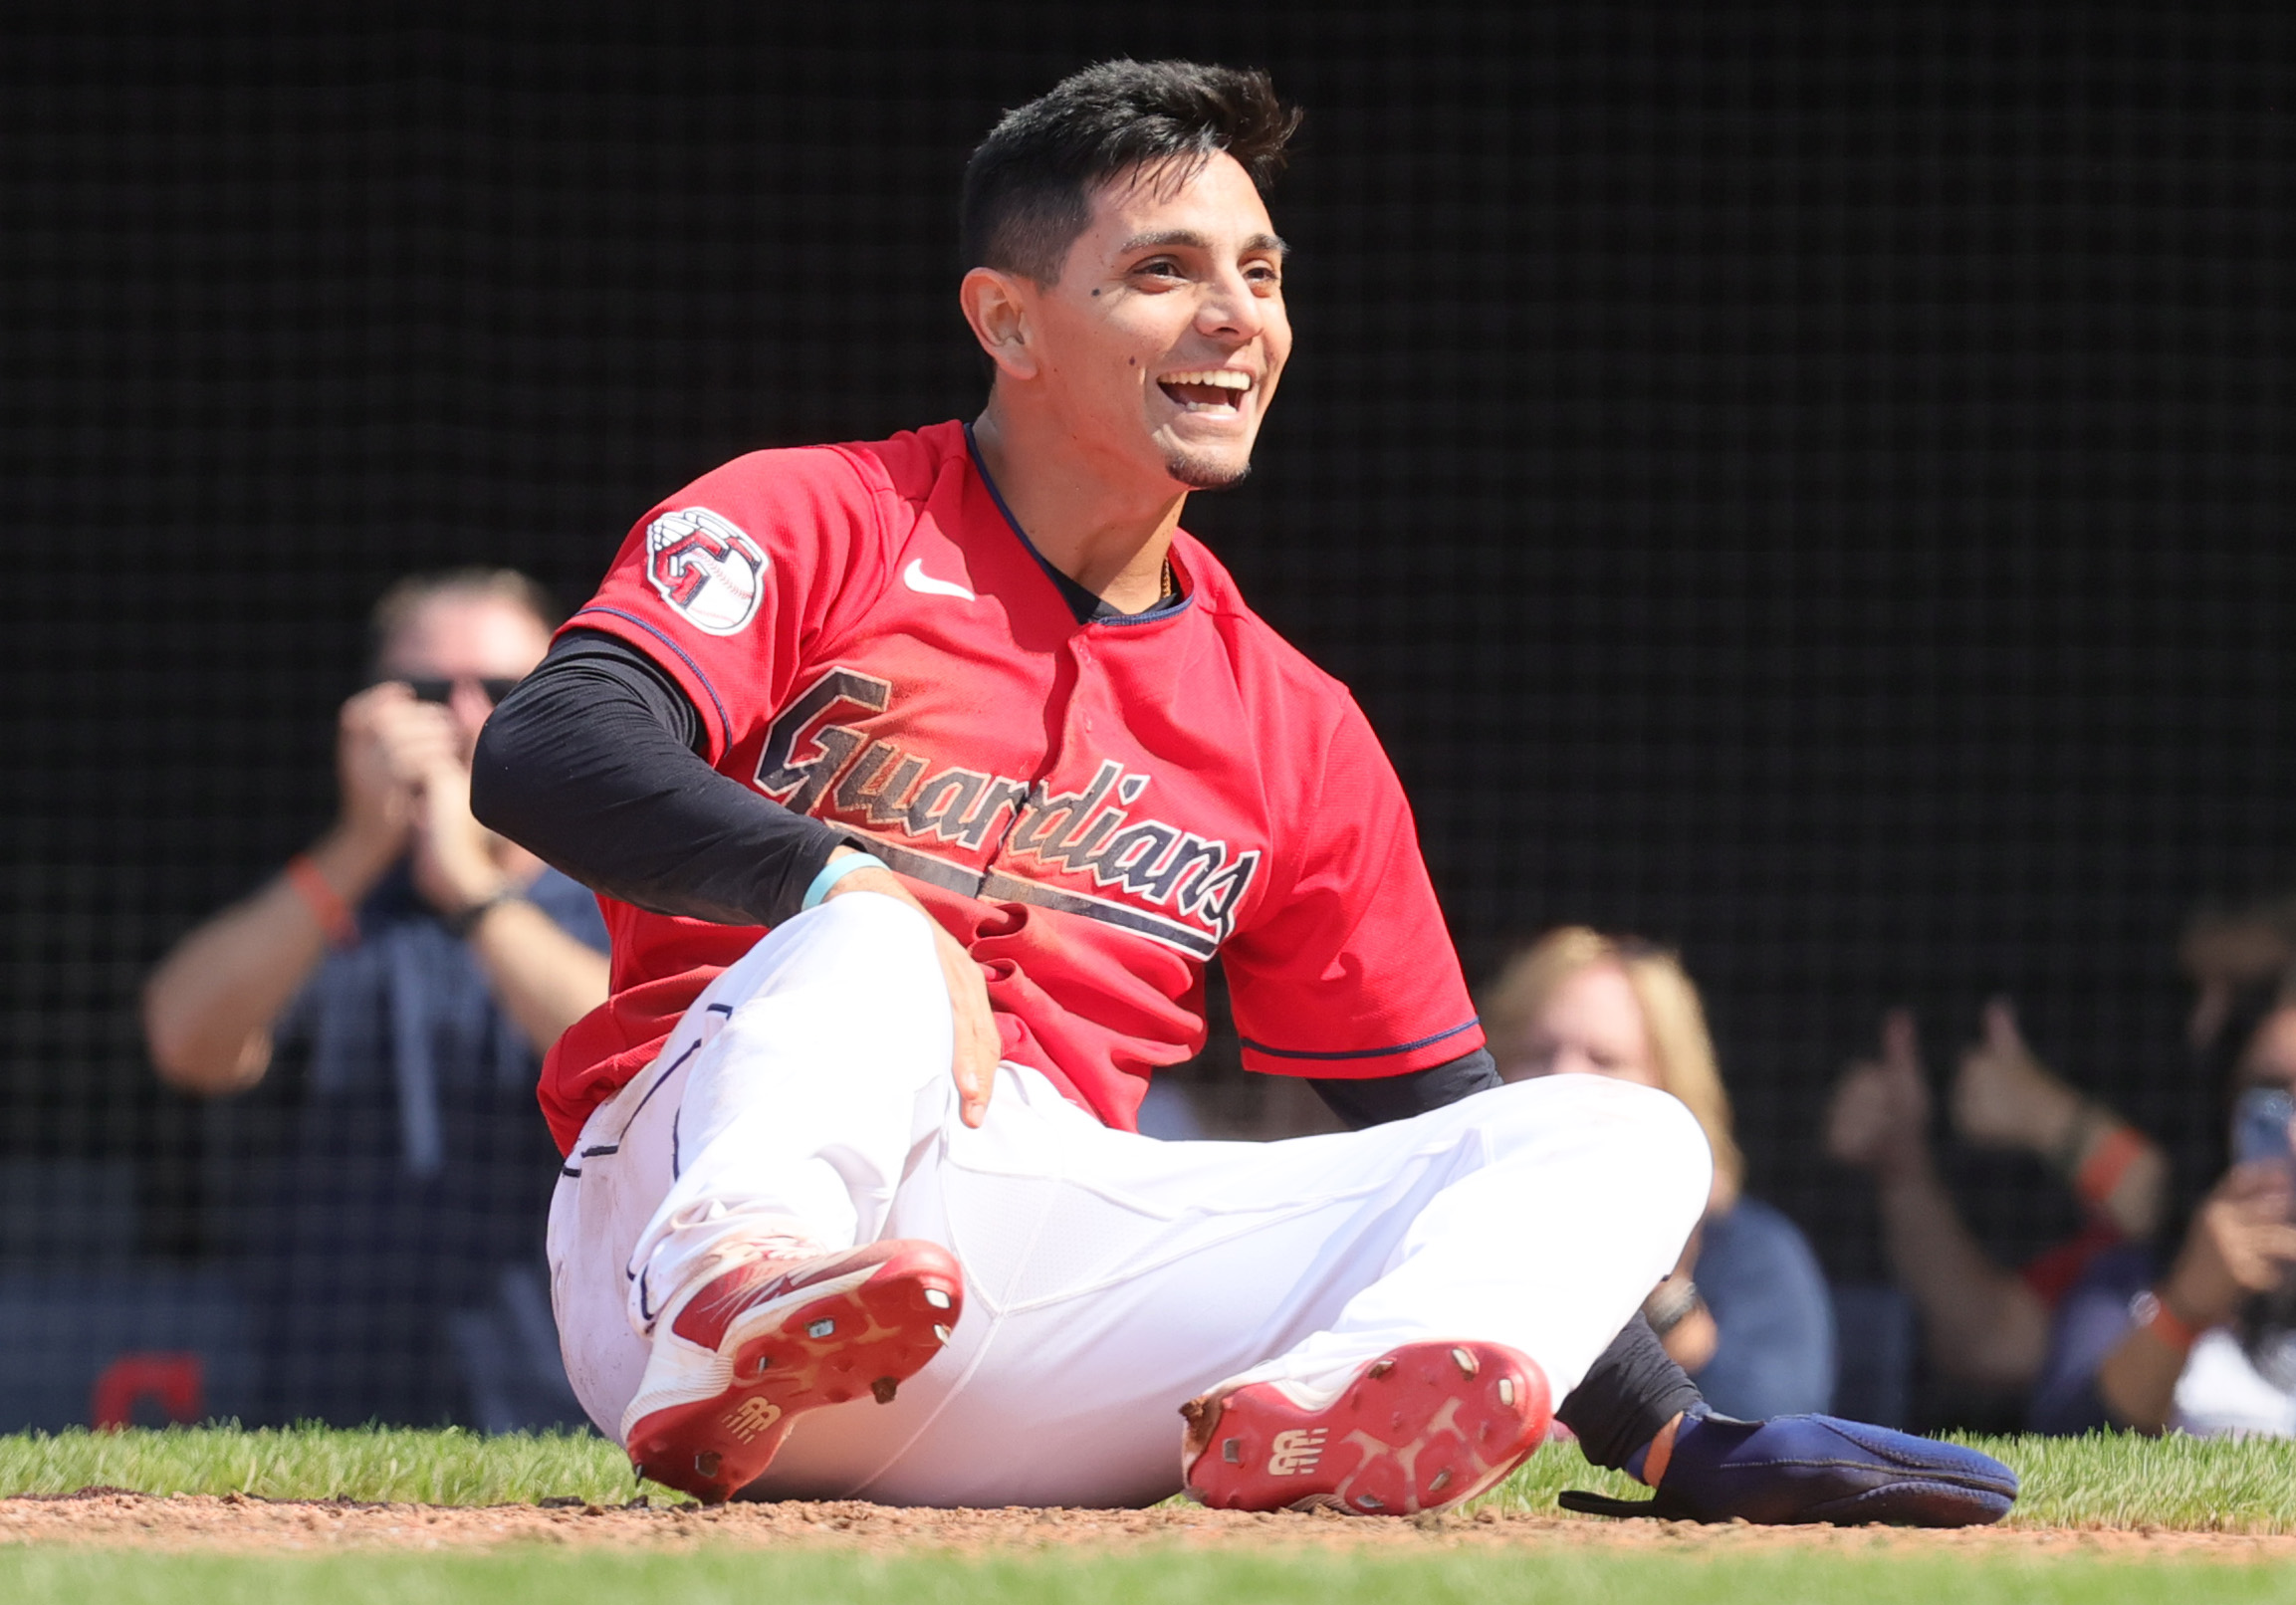 He's a fireball': Jose Ramirez powers Guardians in playoff chase